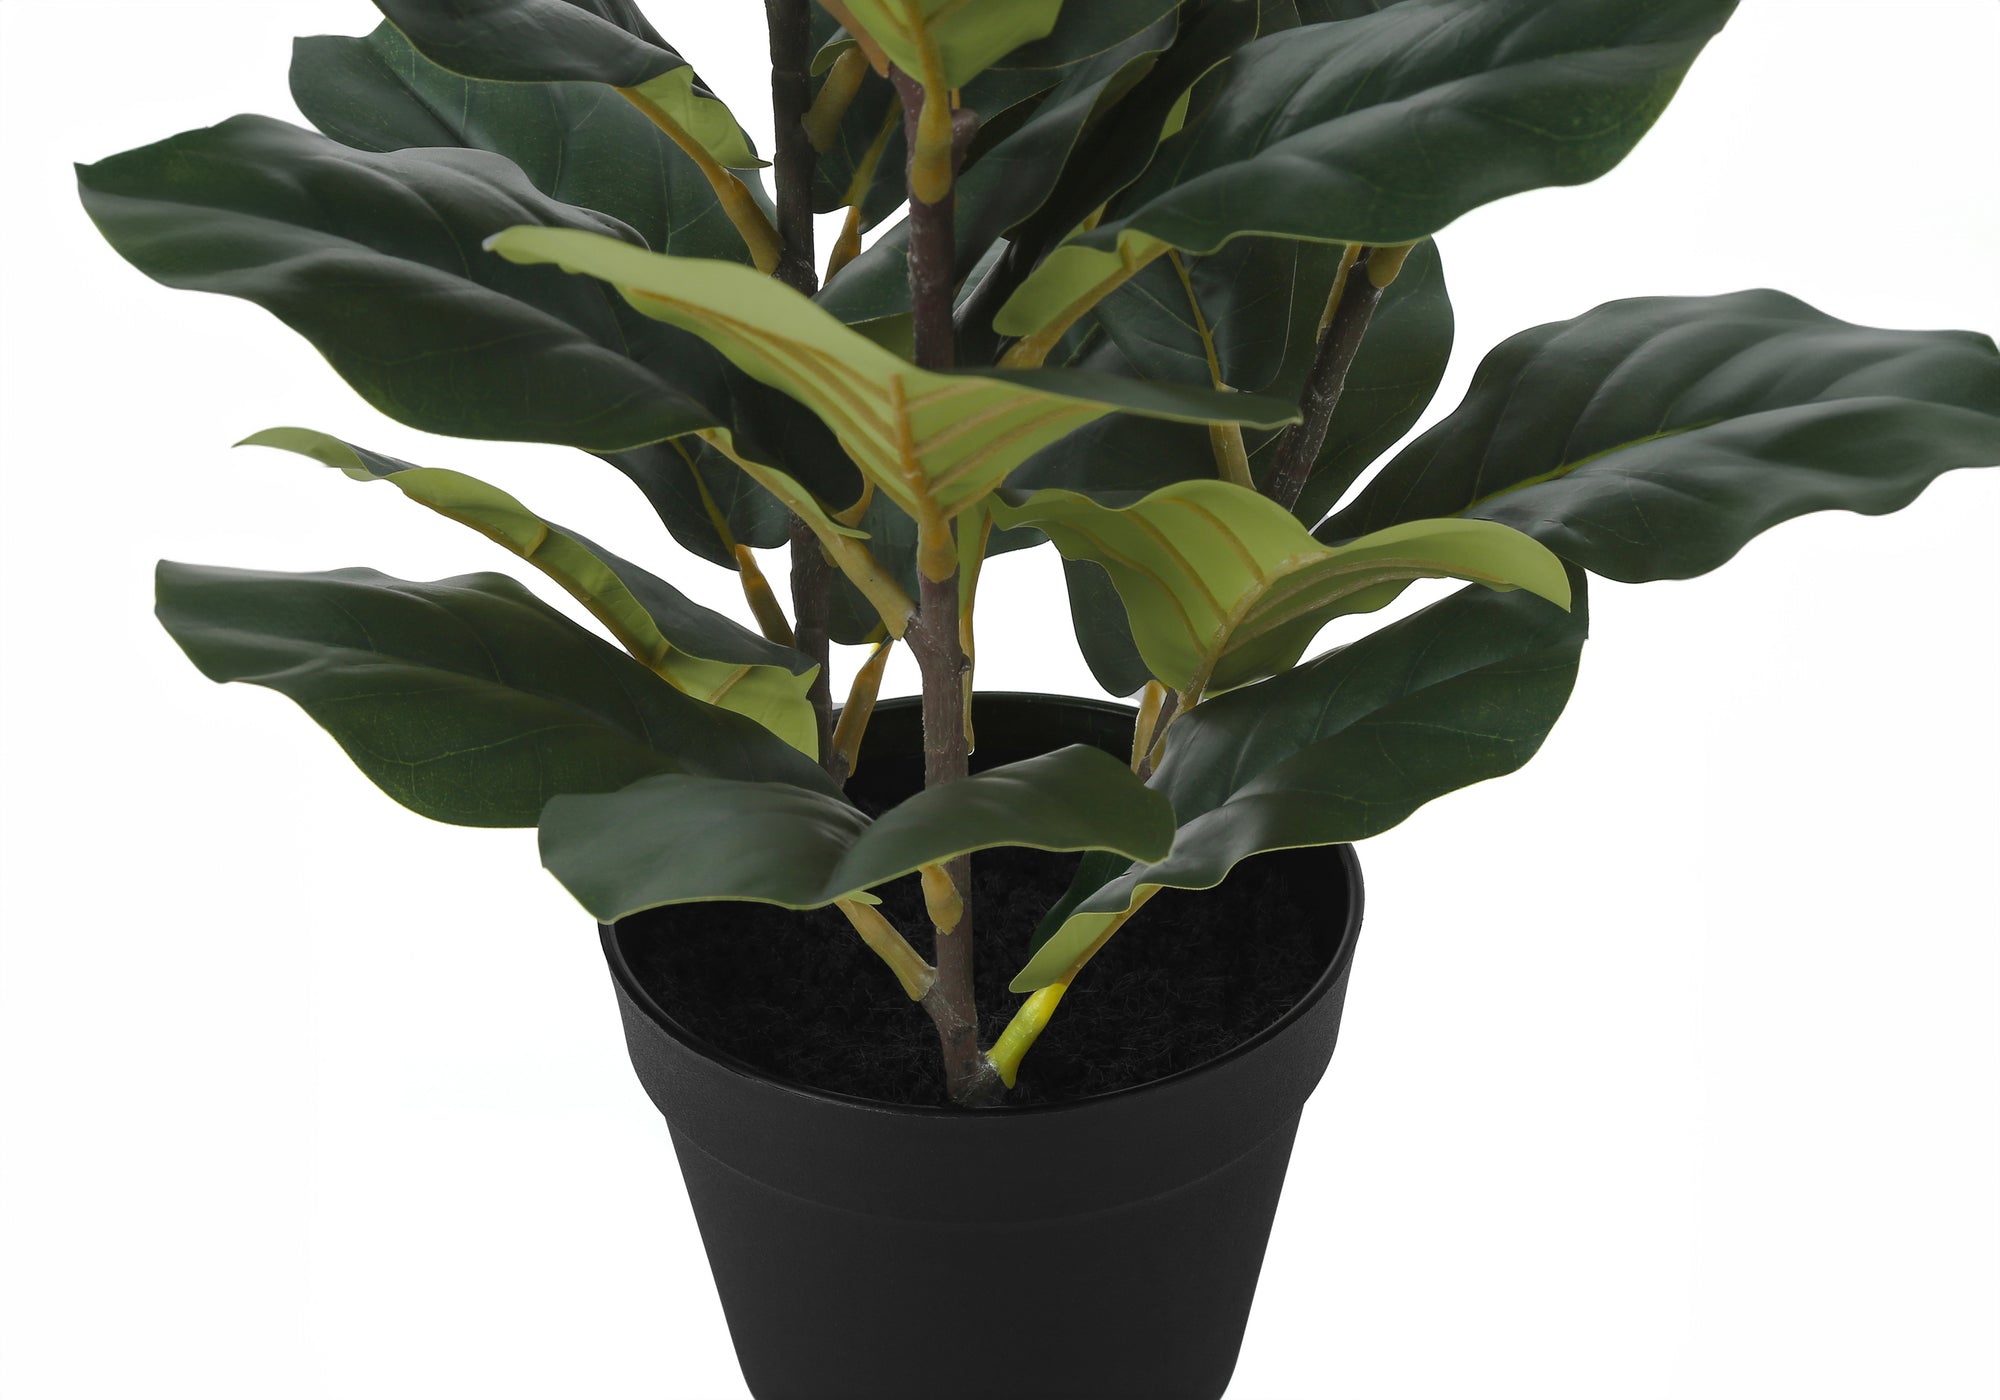 MN-329511    Artificial Plant, 32" Tall, Fiddle Tree, Indoor, Faux, Fake, Floor, Greenery, Potted, Real Touch, Decorative, Green Leaves, Black Pot